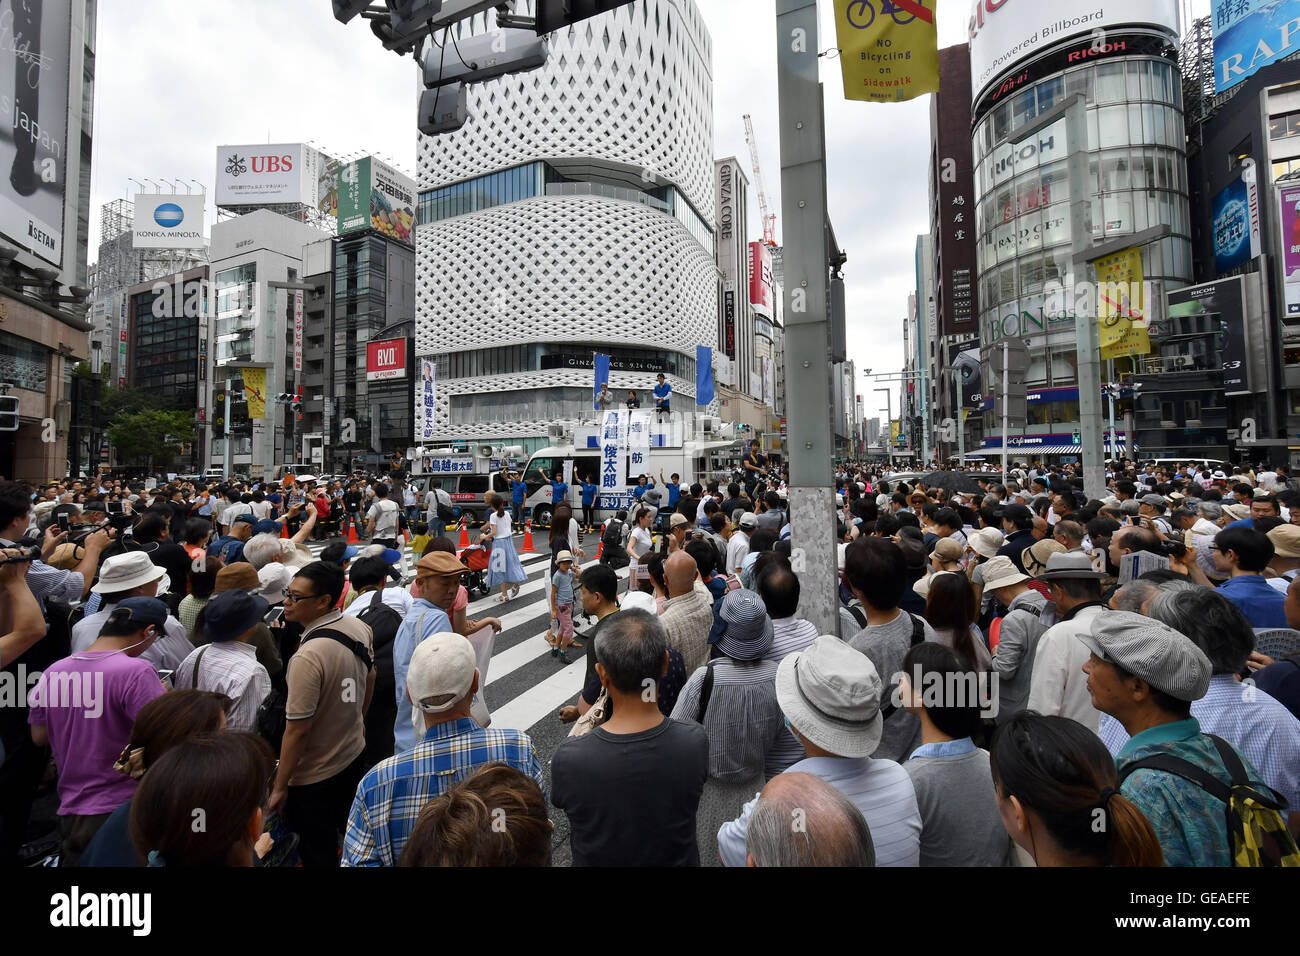 July 24, 2016, Tokyo, Japan - Holiday goers and Sunday shoppers stop and listen to Japans free journalist Shuntaro Torigoe deliver his speech at Tokyos bustling Ginza Street on July 24, 2016, in his last week of campaigning for the July 31 gubernatorial election. With the voting date one week away, Torigoe, 76, who has the backing from four opposition parties, is trailing former Defense Minister Yuriko Koike in the race according to latest surveys. (Photo by Natsuki Sakai/AFLO) AYF -mis- Stock Photo